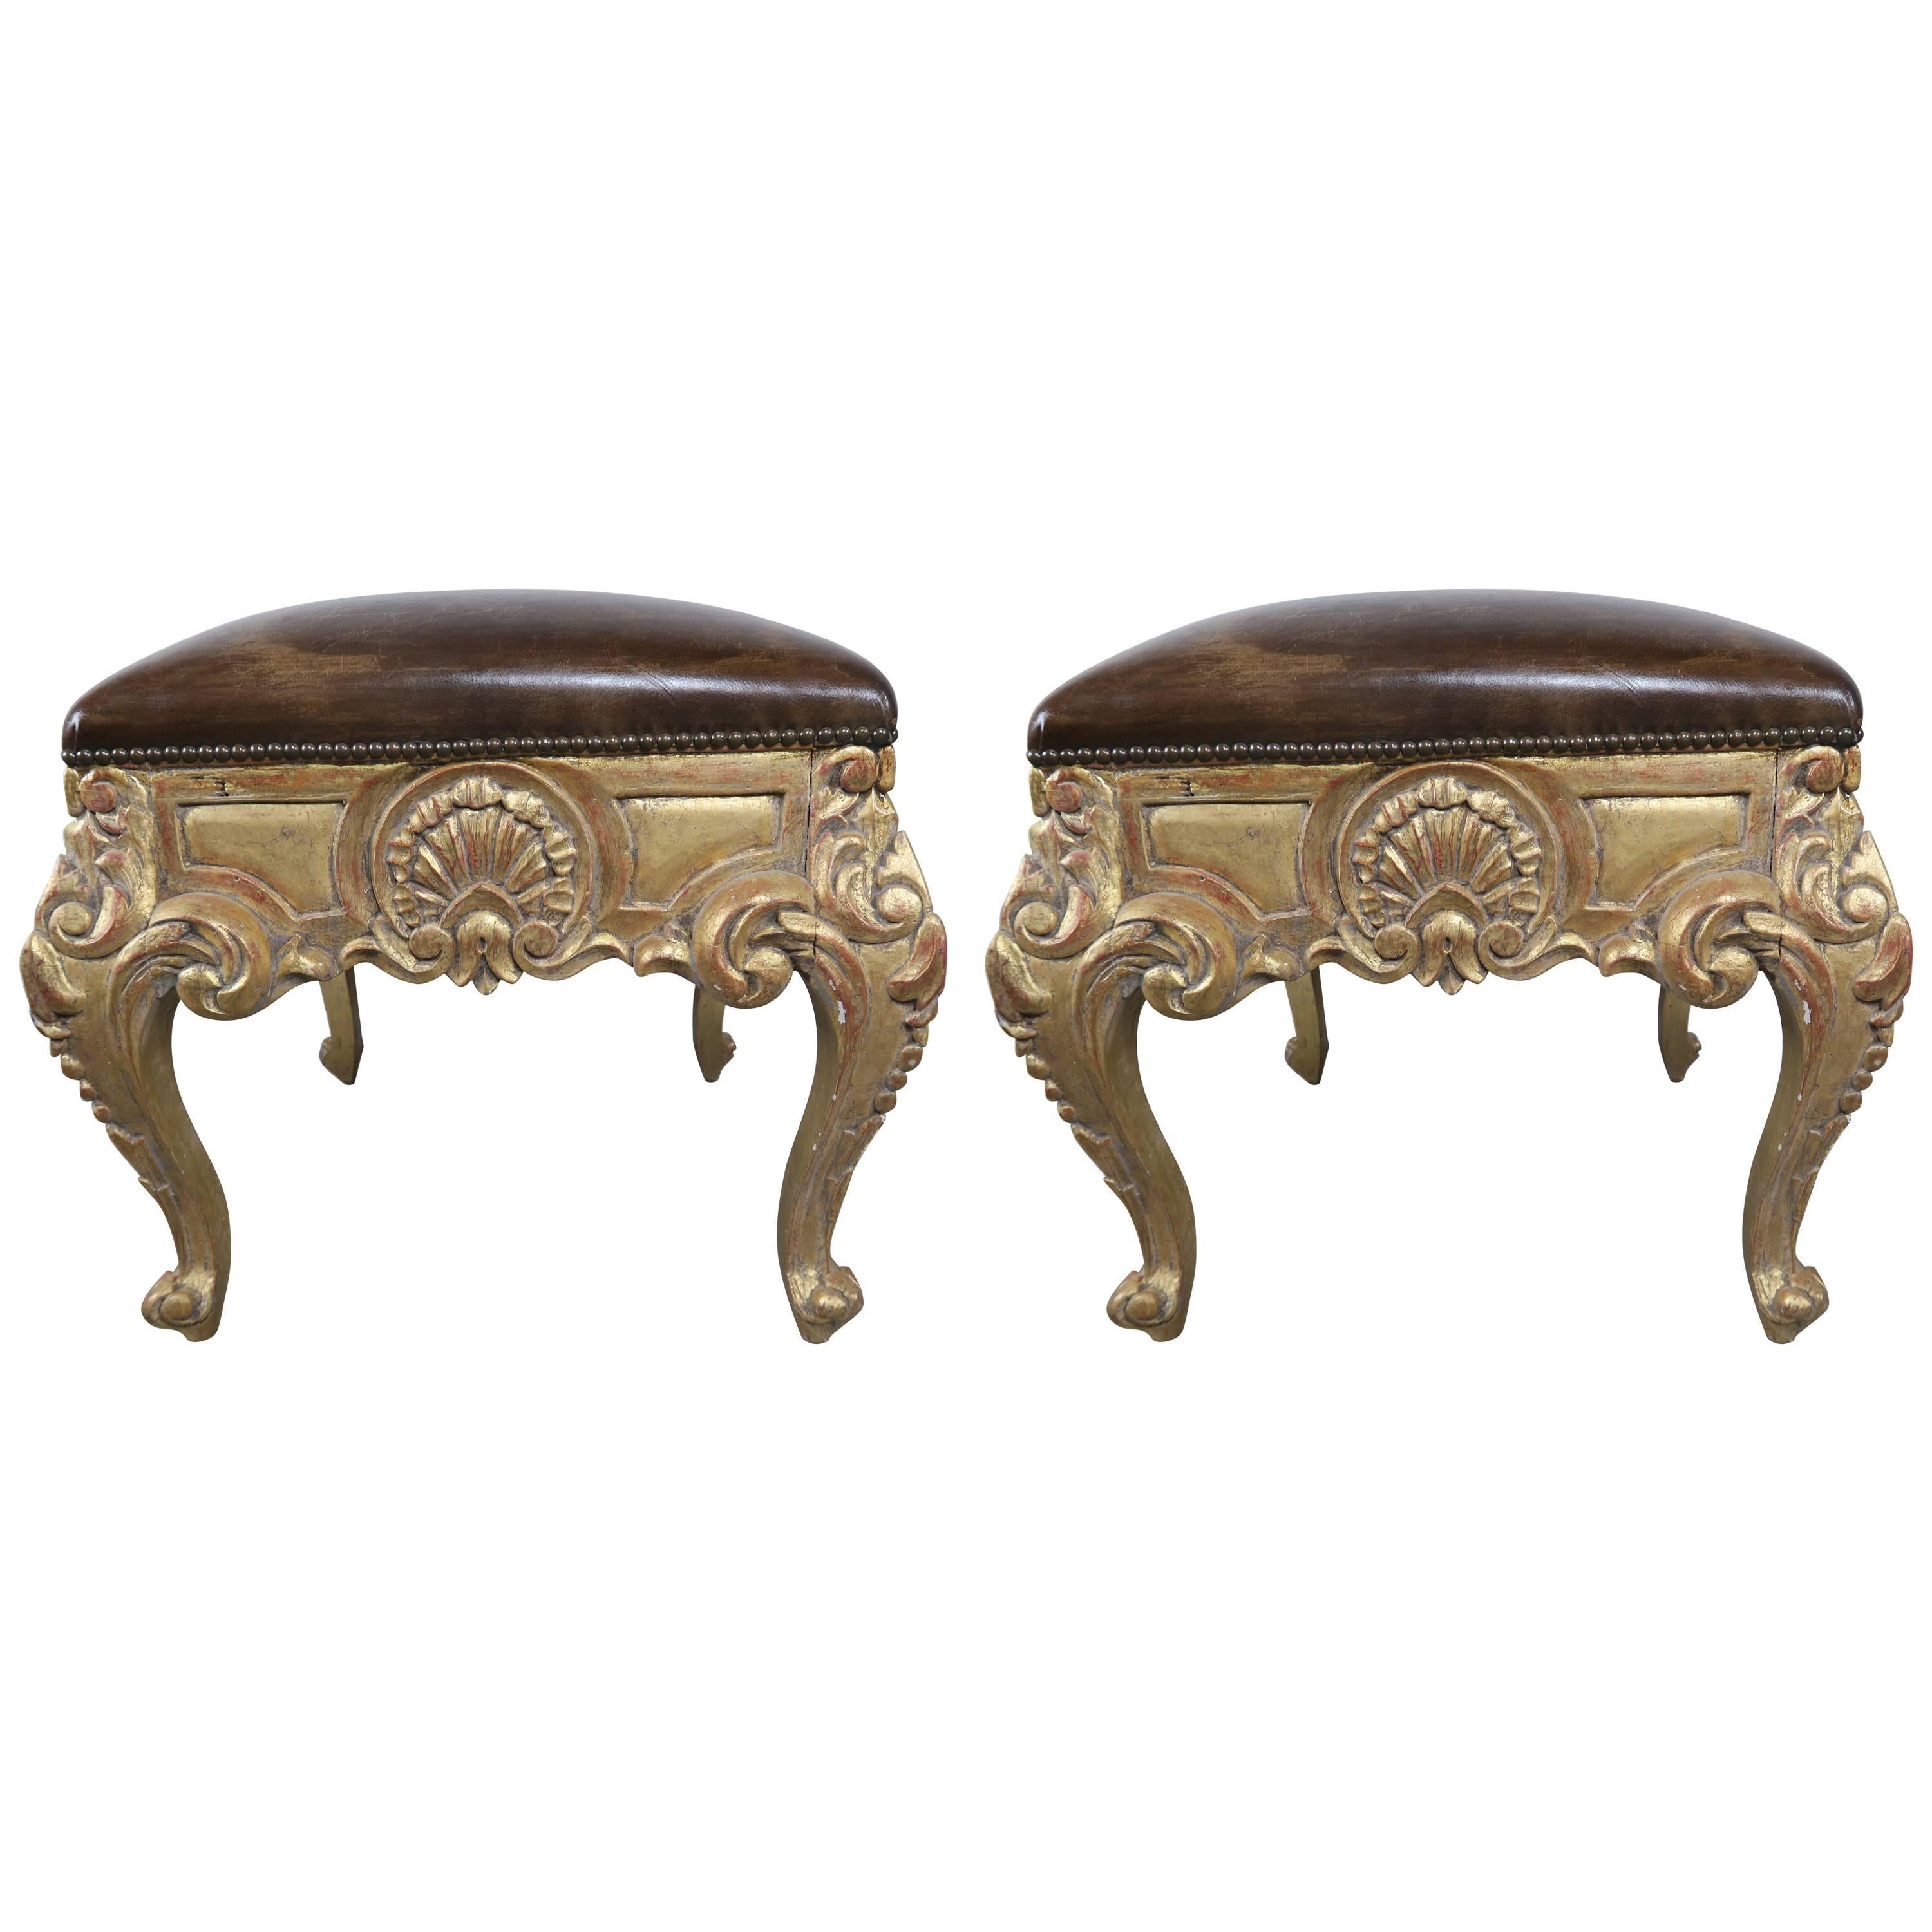 Pair of French Giltwood Leather Upholstered Benches